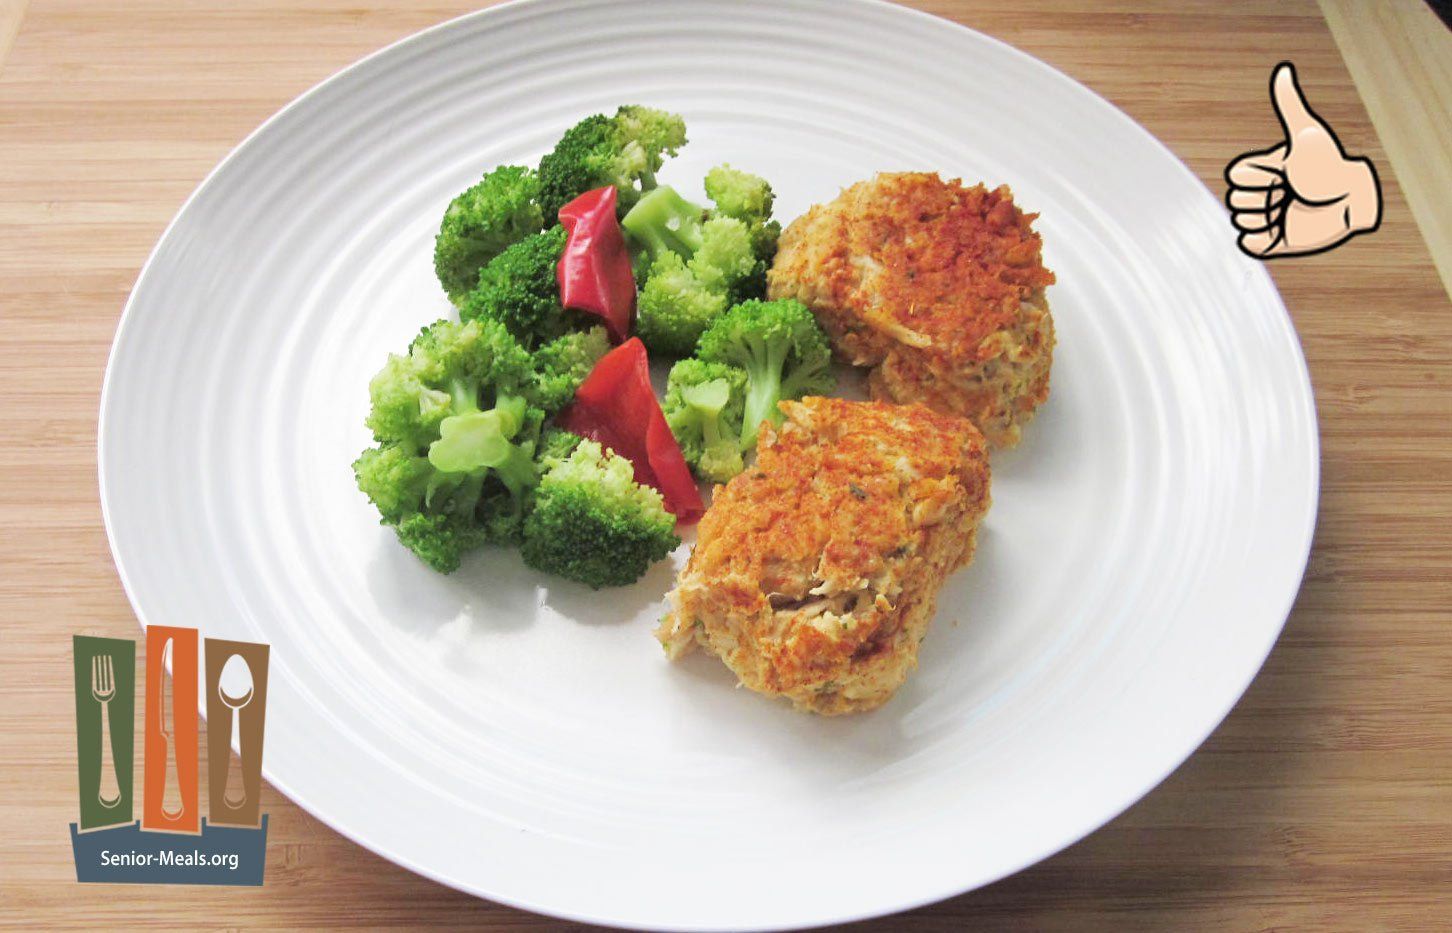 Crab Cakes and Broccoli with Sweet Red Peppers